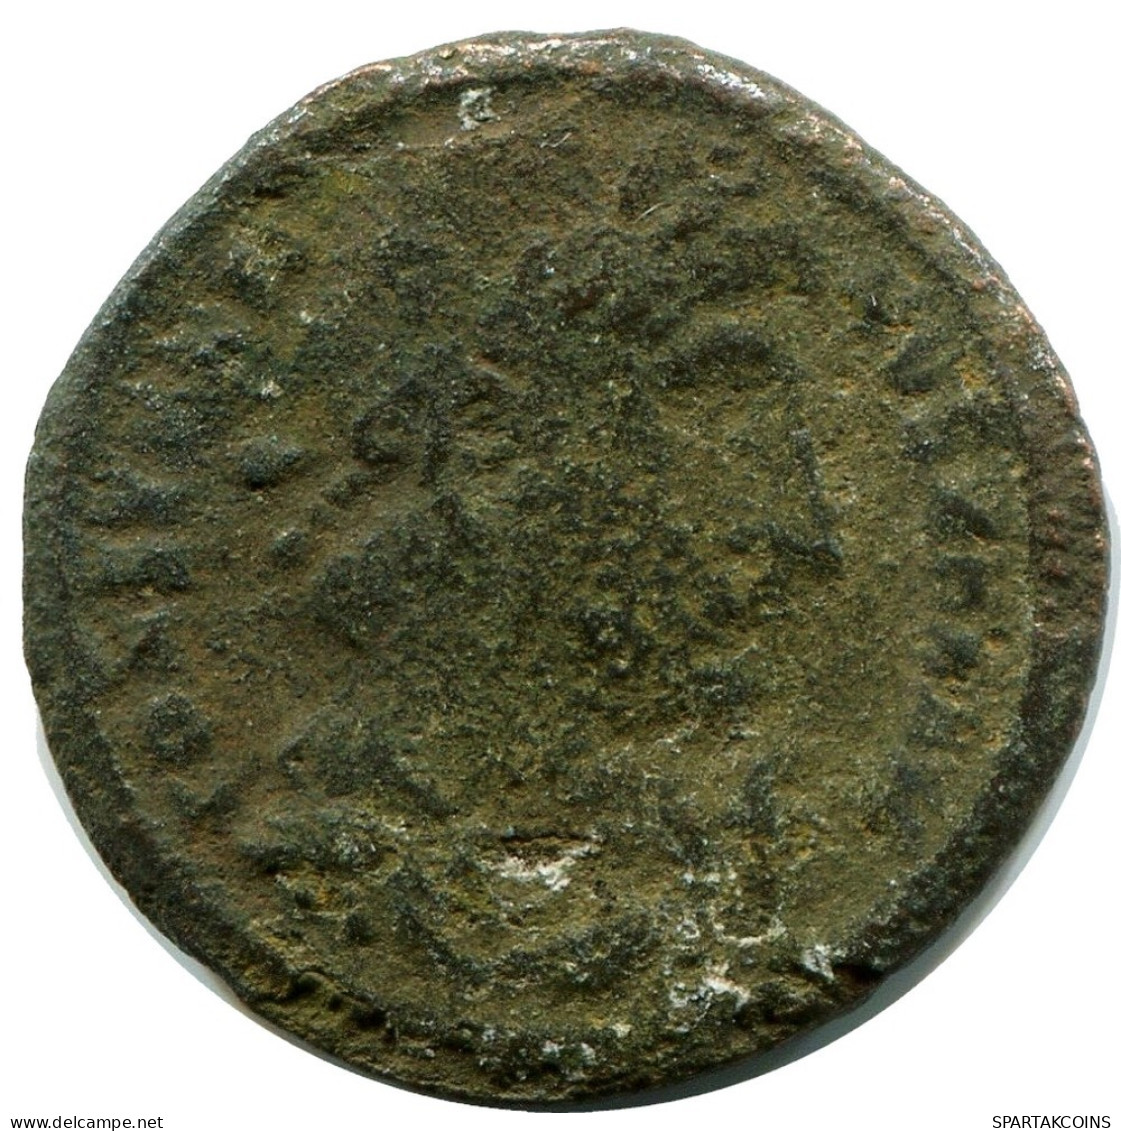 CONSTANTINE I MINTED IN HERACLEA FROM THE ROYAL ONTARIO MUSEUM #ANC11197.14.U.A - El Imperio Christiano (307 / 363)